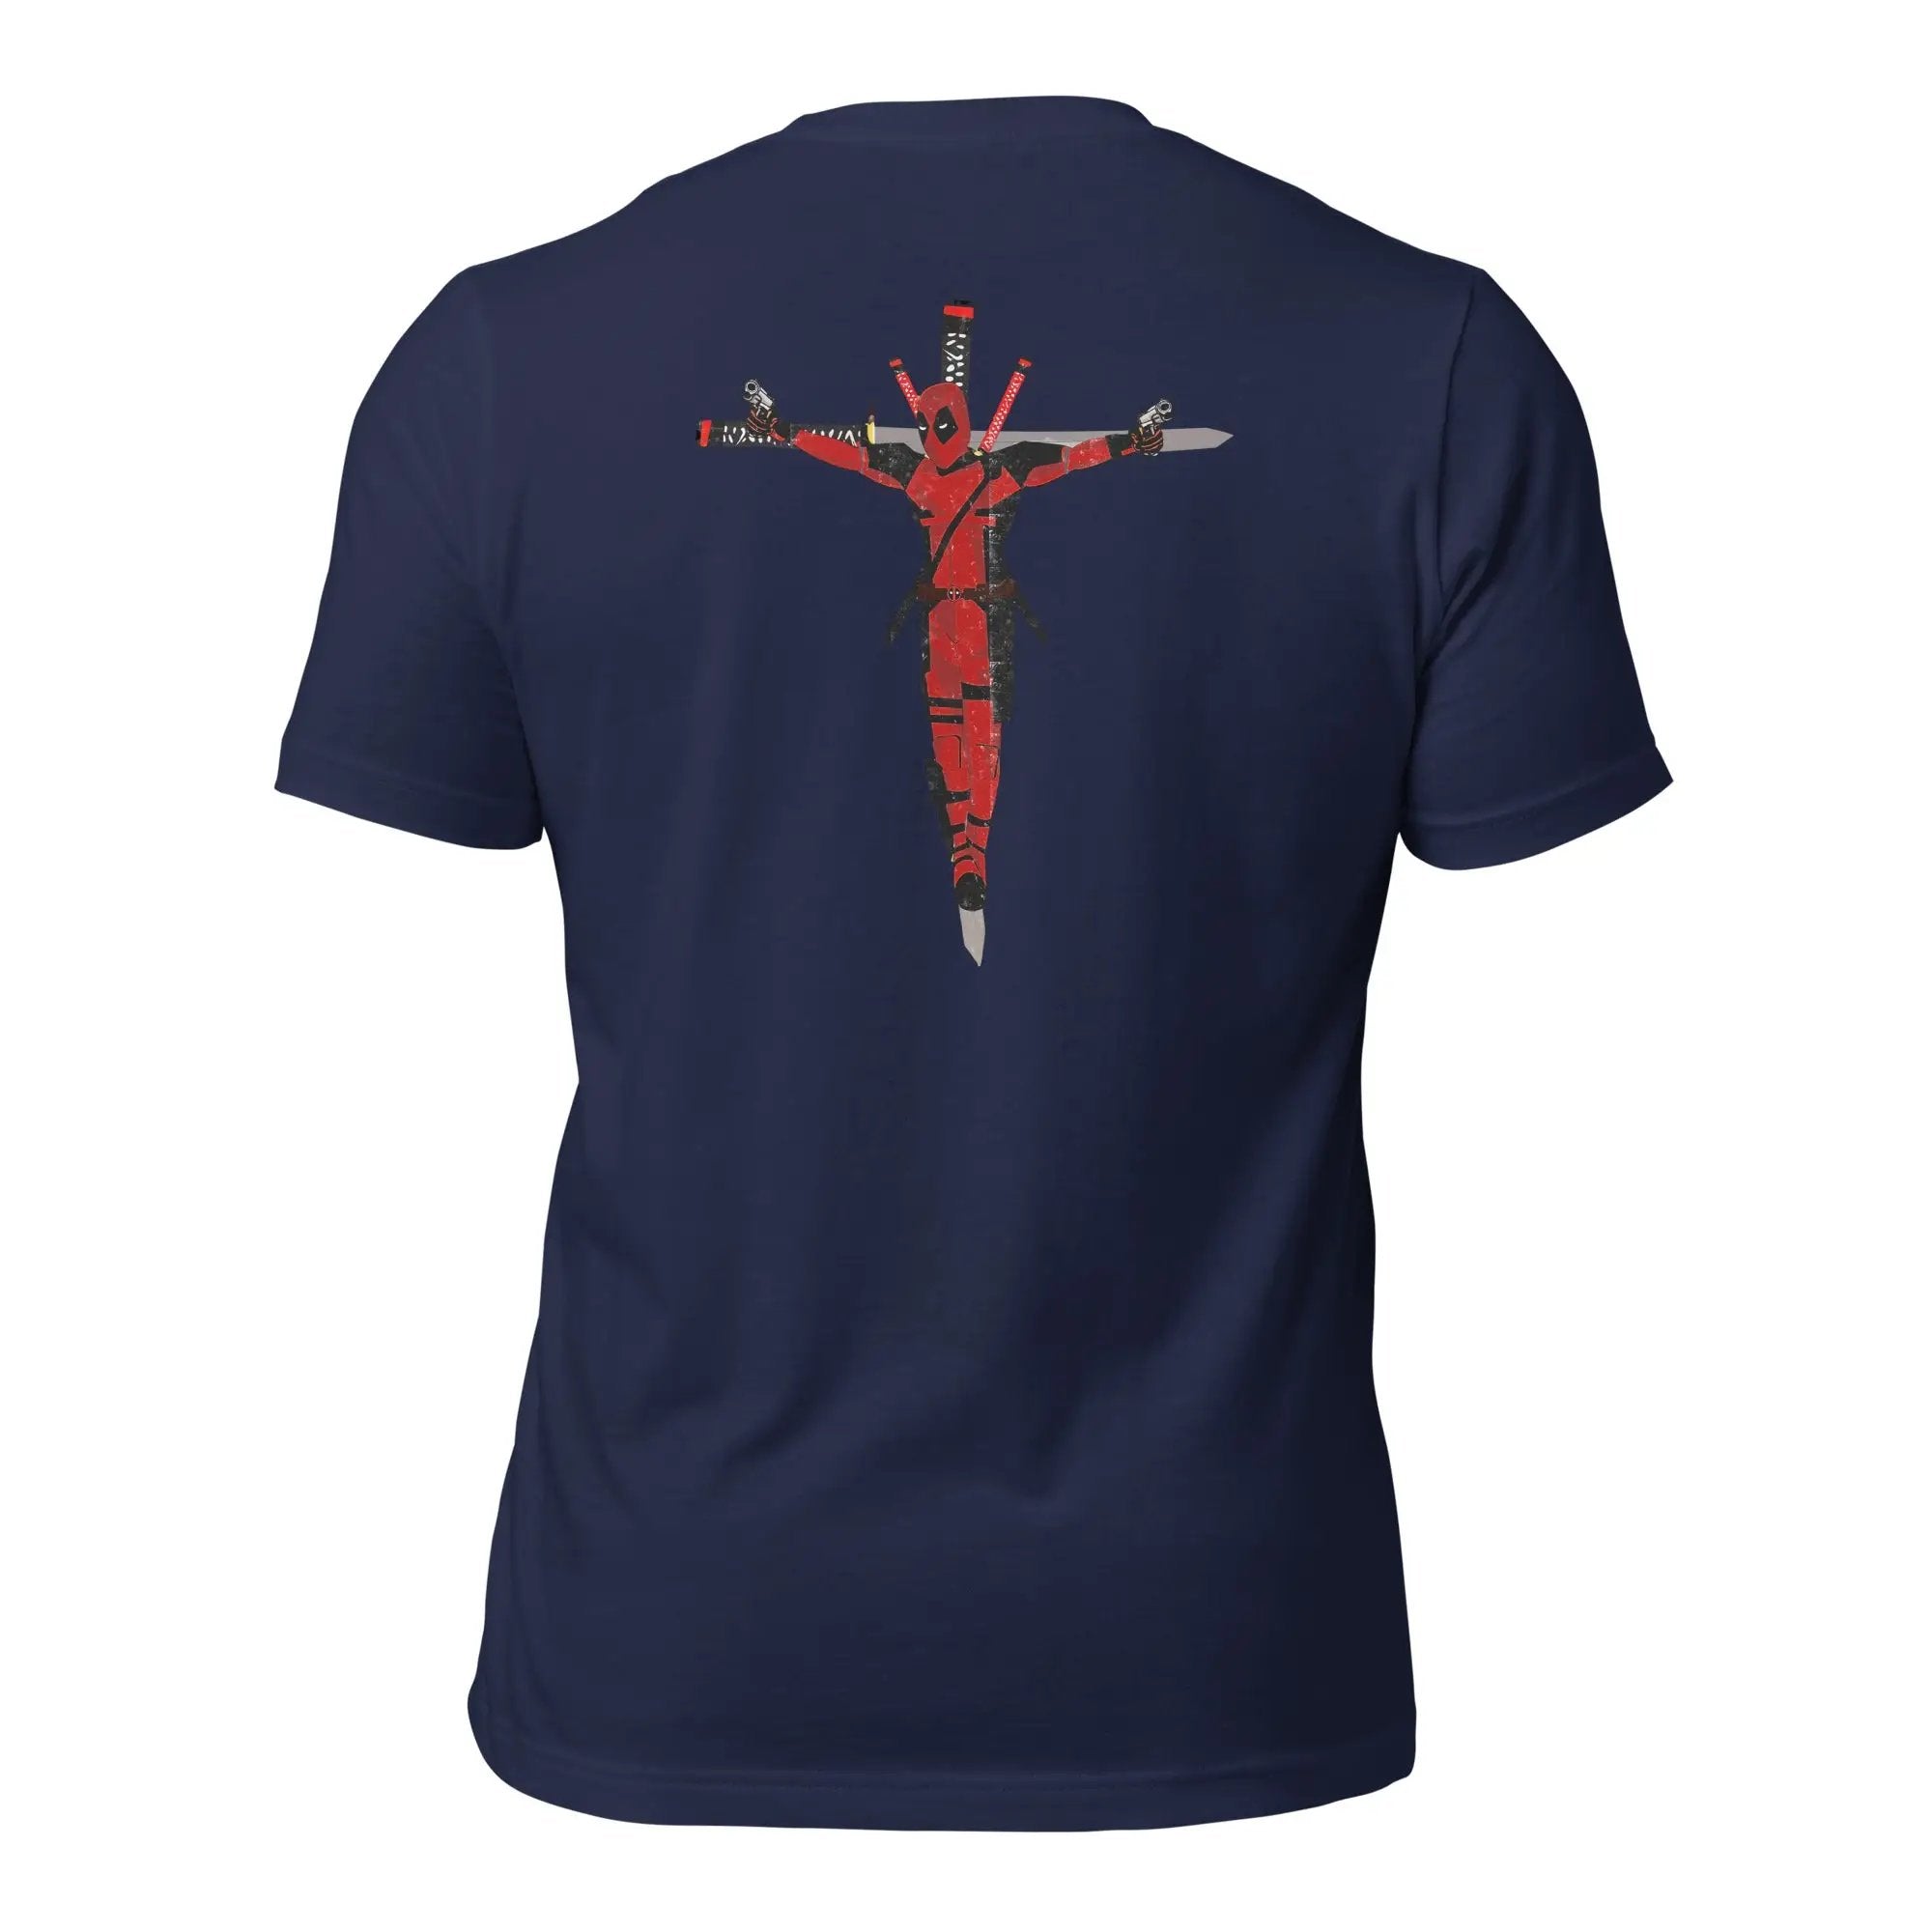 a women's t - shirt with the image of a crucifix